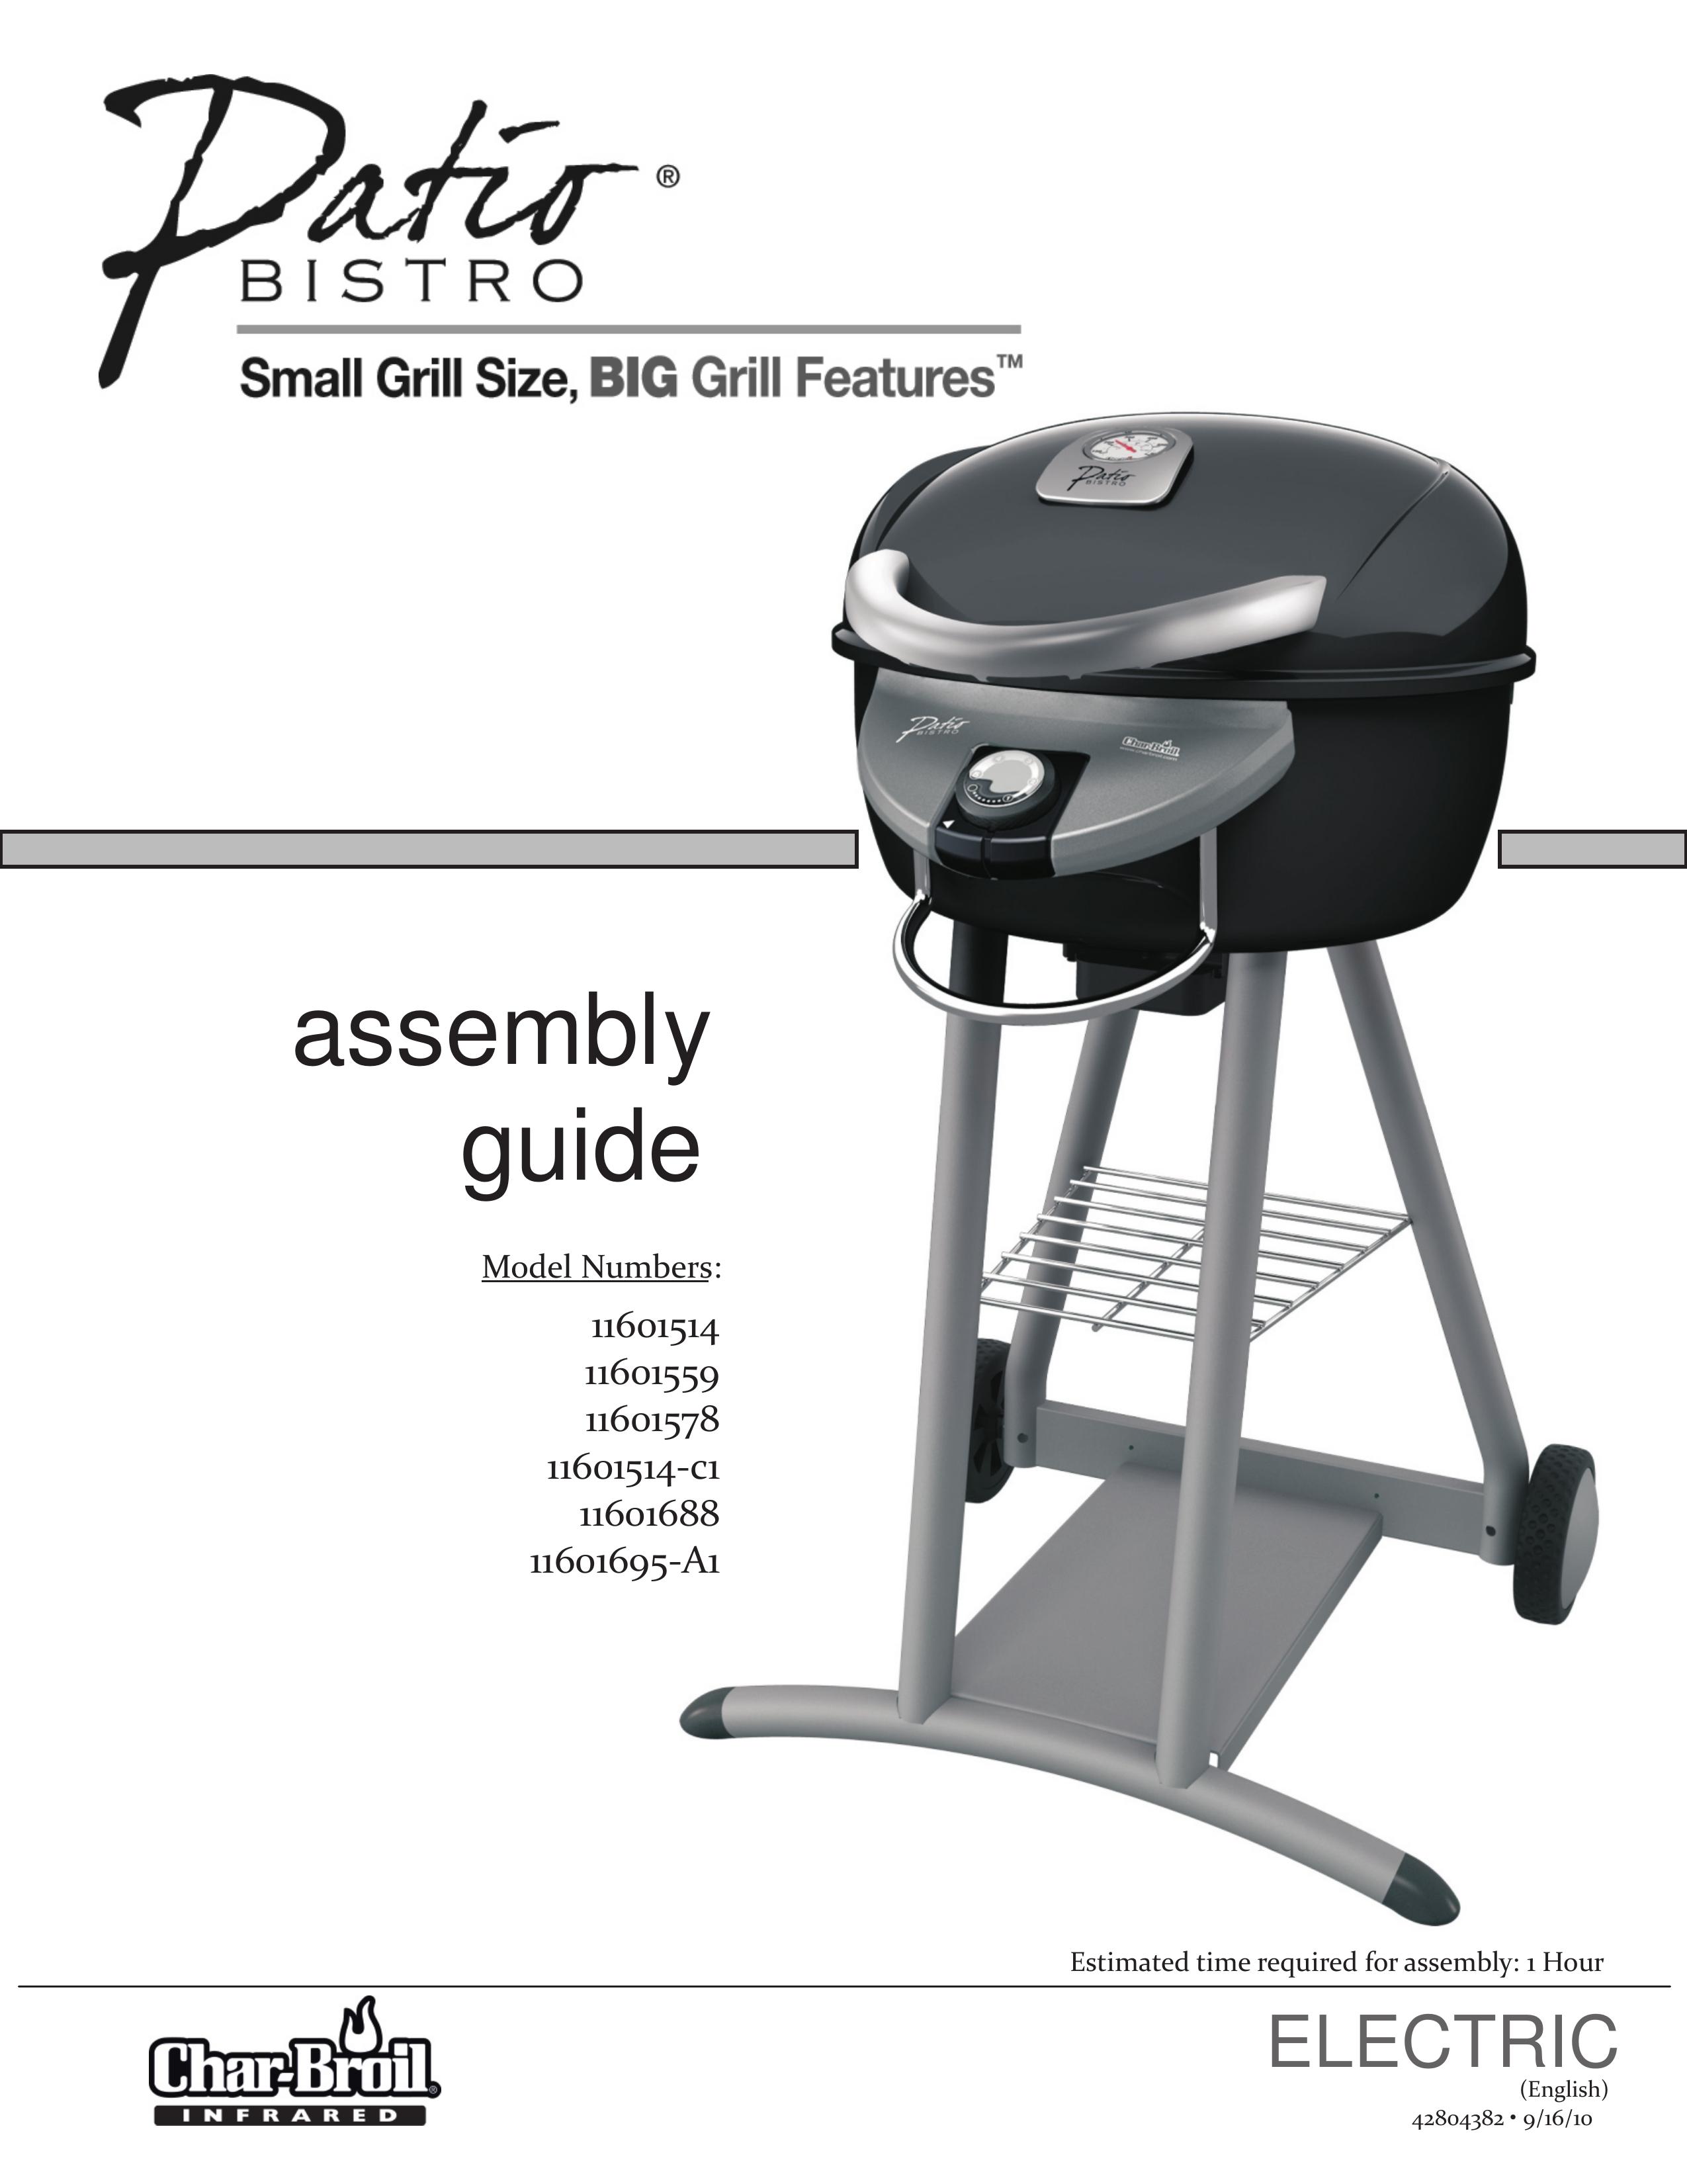 Char-Broil 11601514-C1 Charcoal Grill User Manual